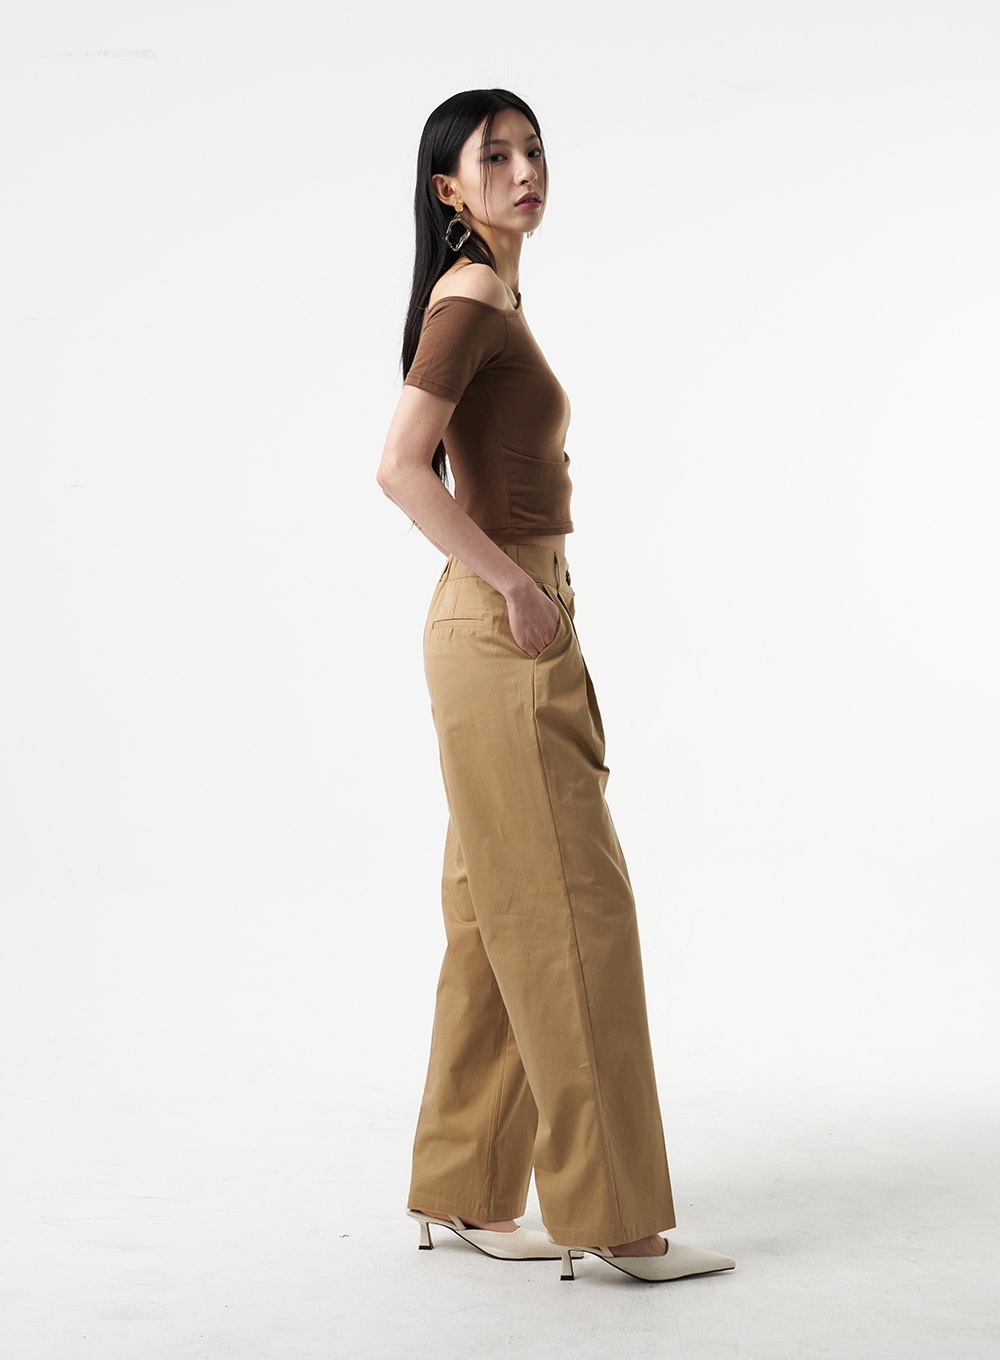 Uniqlo U Wide Fit Curved Pants Review  Curved pants, Uniqlo women outfit,  Dark academia fashion pants